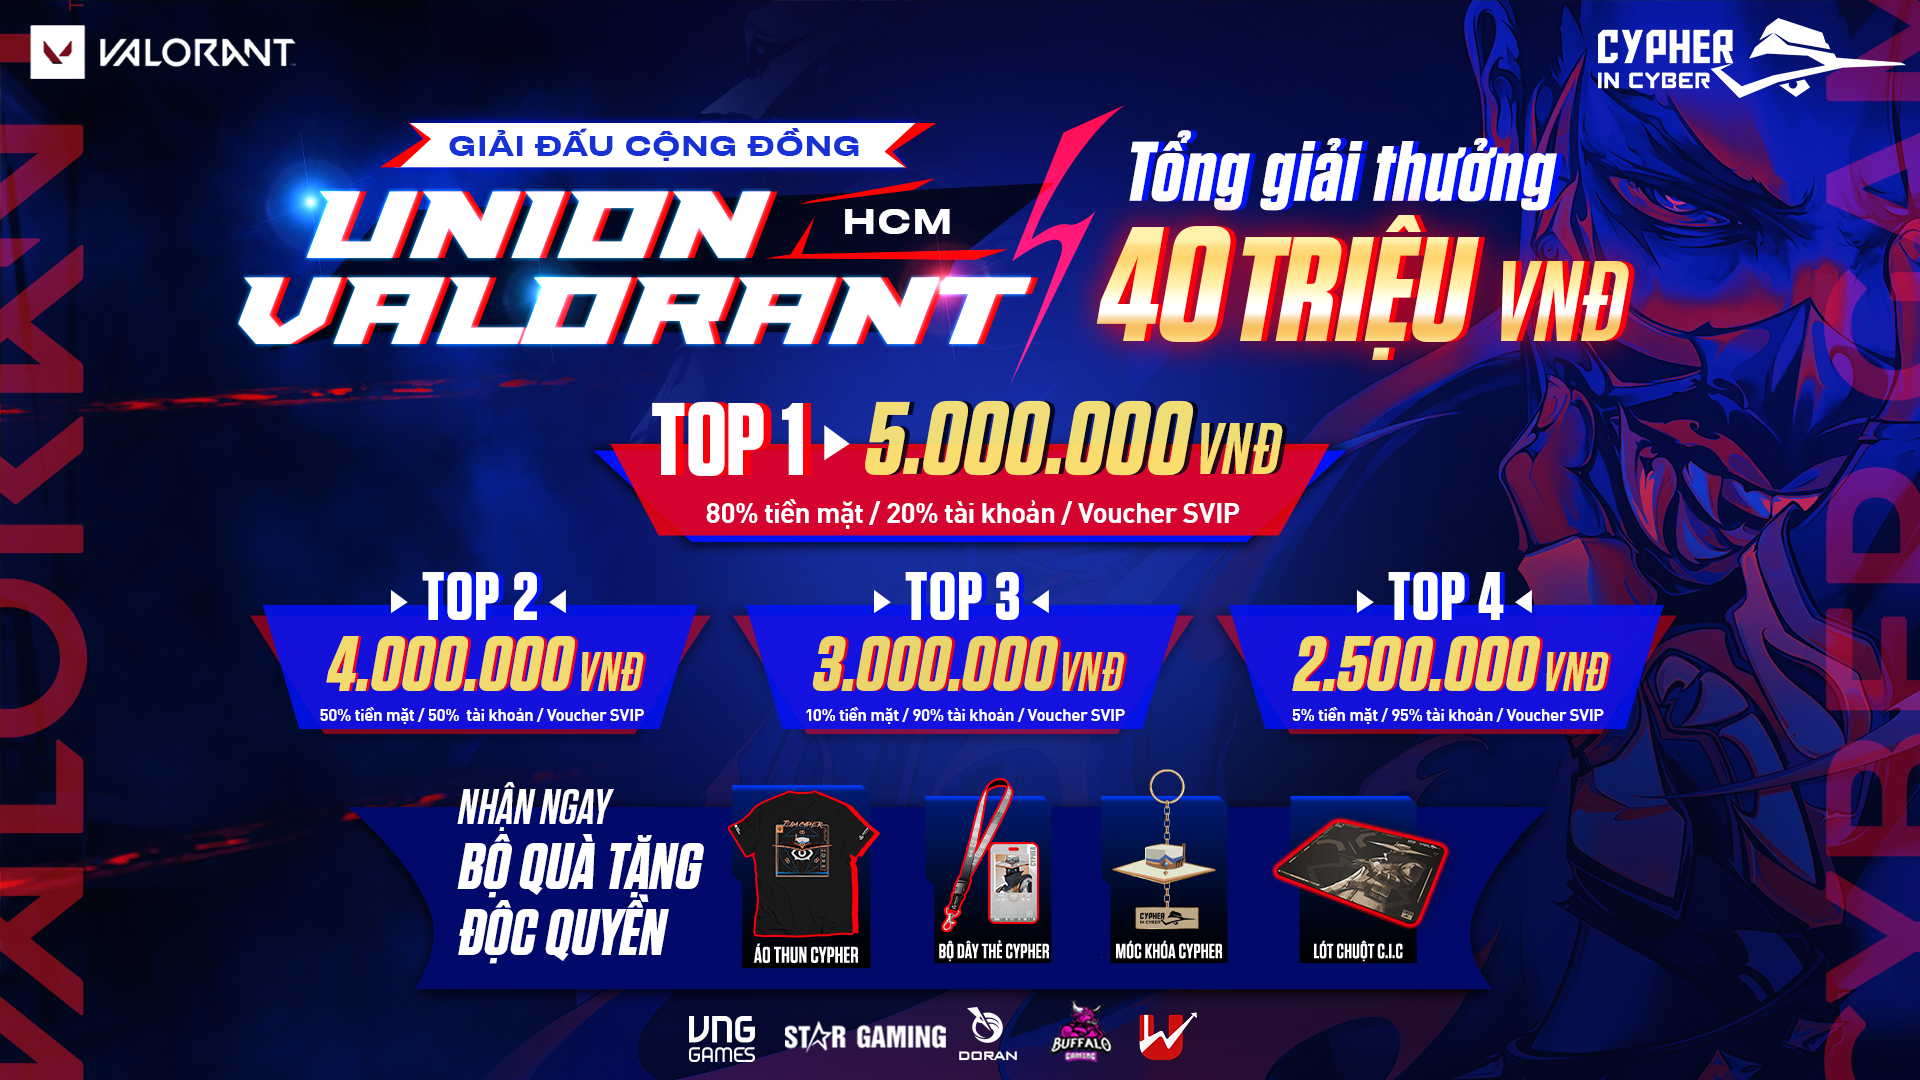 [CYPHER IN CYBER] GIẢI THƯỞNG UNION VALORANT x STAR GAMING